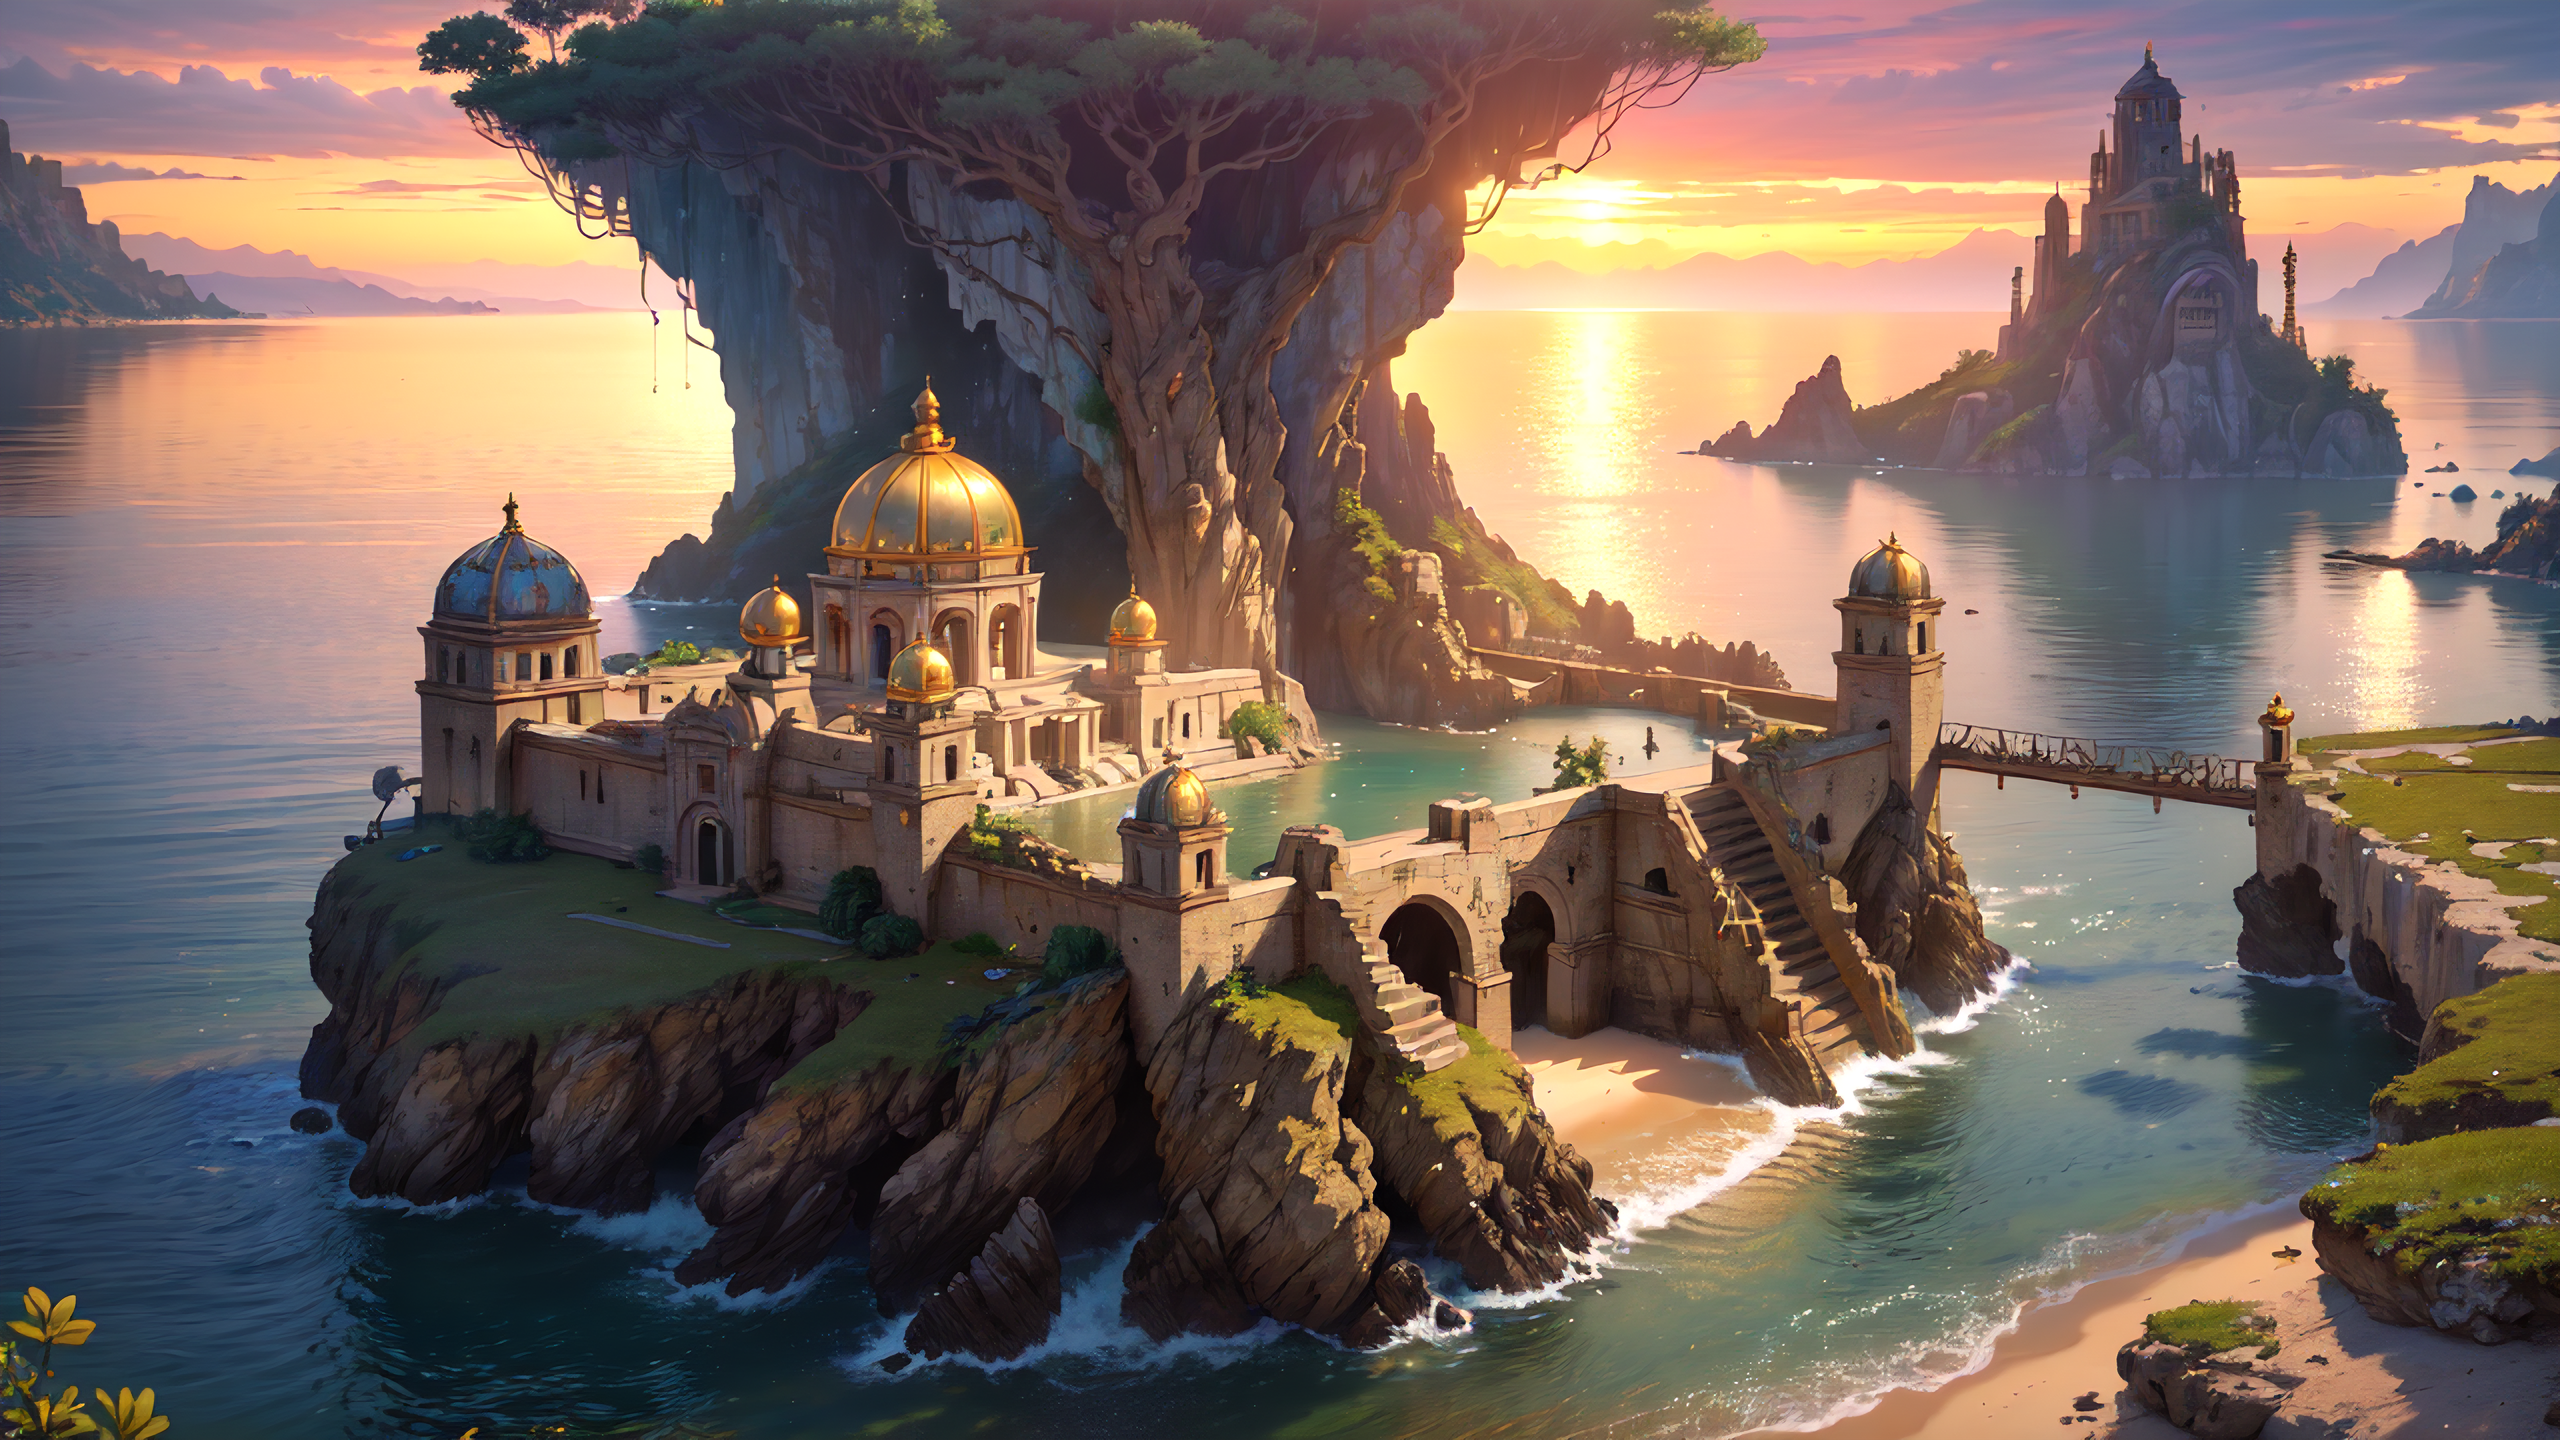 A painting of a fantastical island with a temple, water, and stairs.